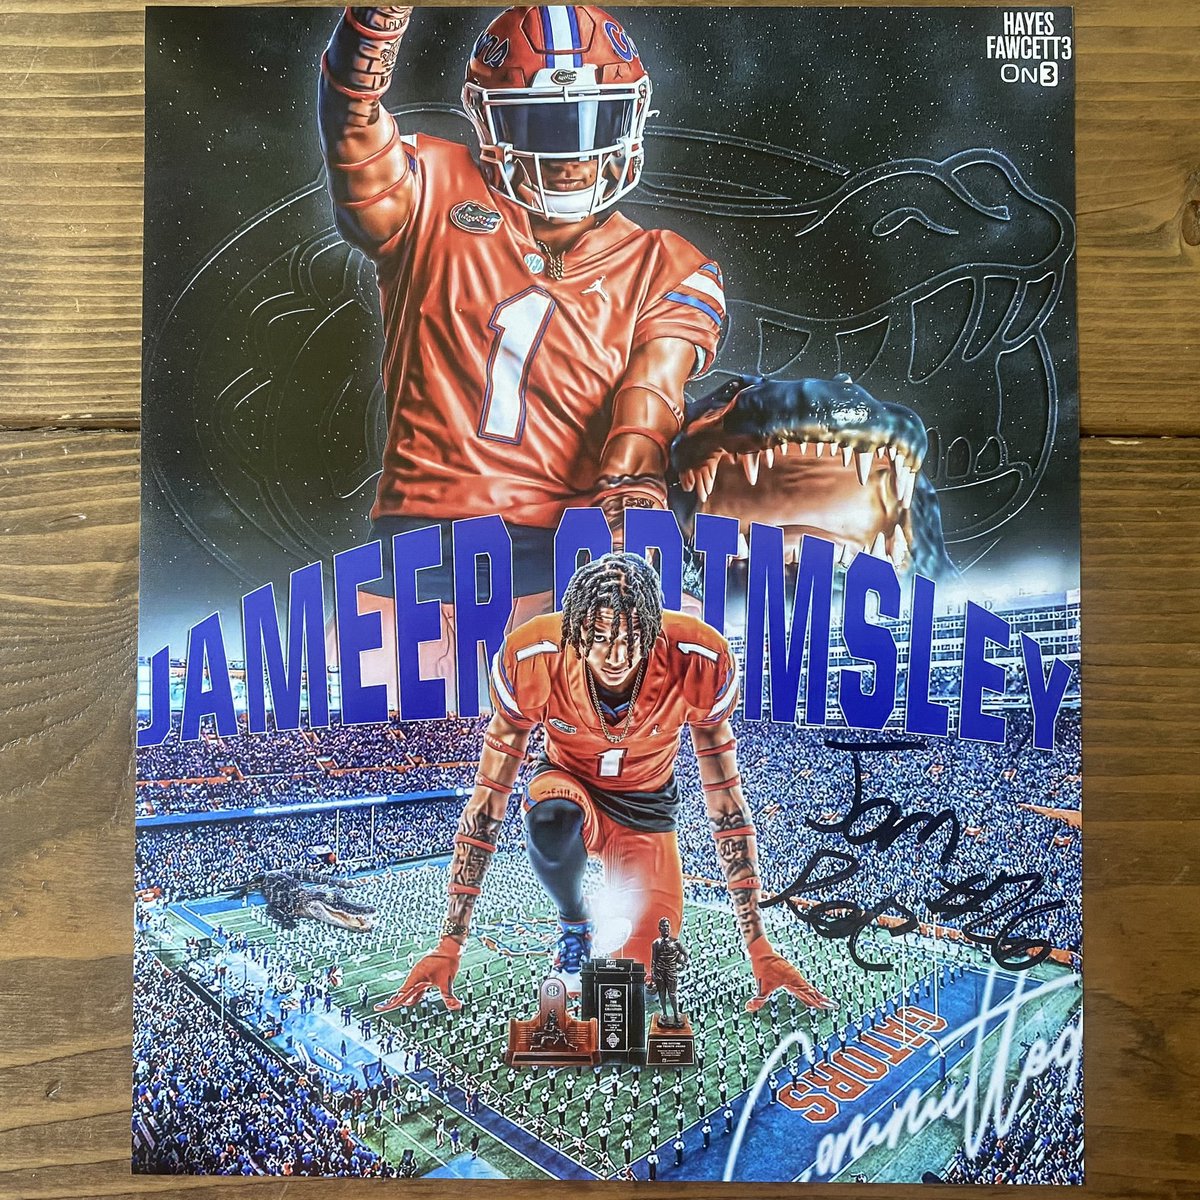 Jam Roc is going to turn a lot of heads next season. Let’s get to work, @jamroc_ ! Thanks for the #autograph #GoGators 🐊 🏈